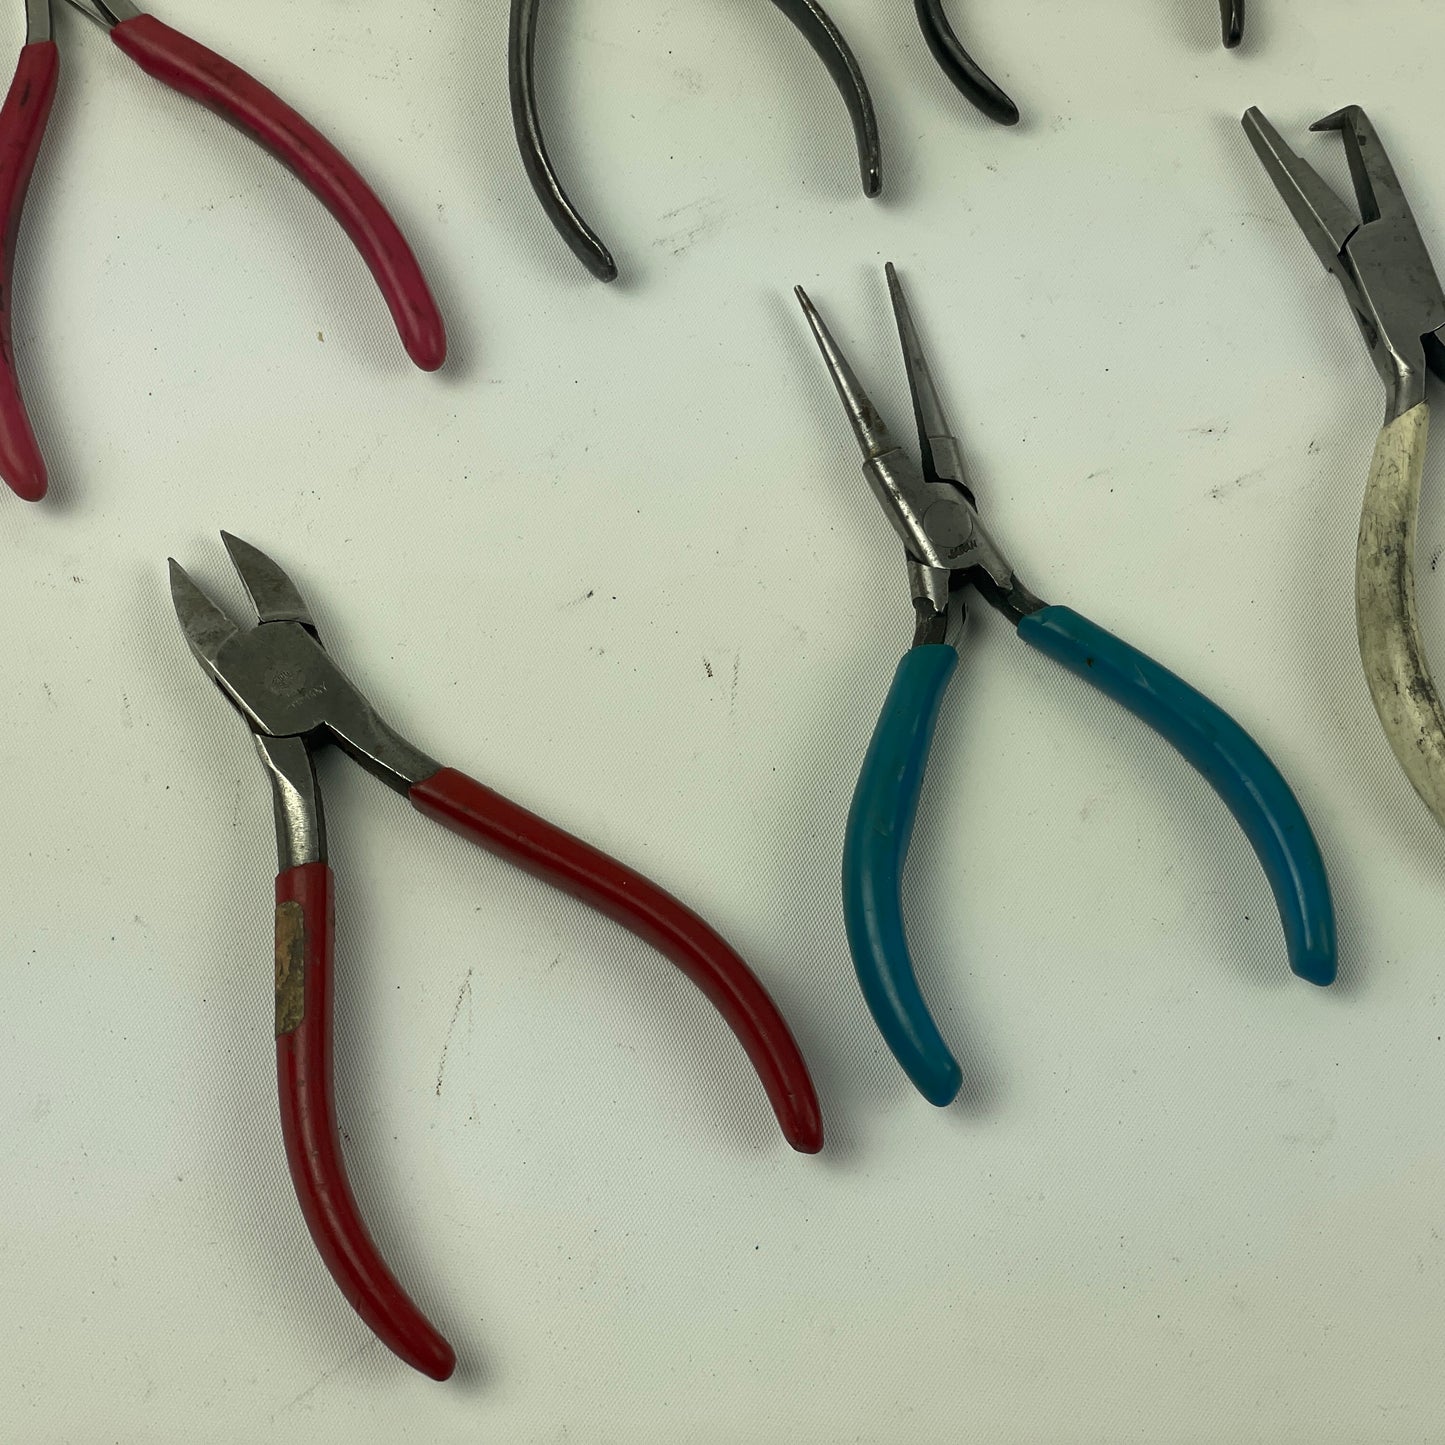 May Lot 60- Watchmaker’s Selection of Thirteen Pairs of Bench Pliers